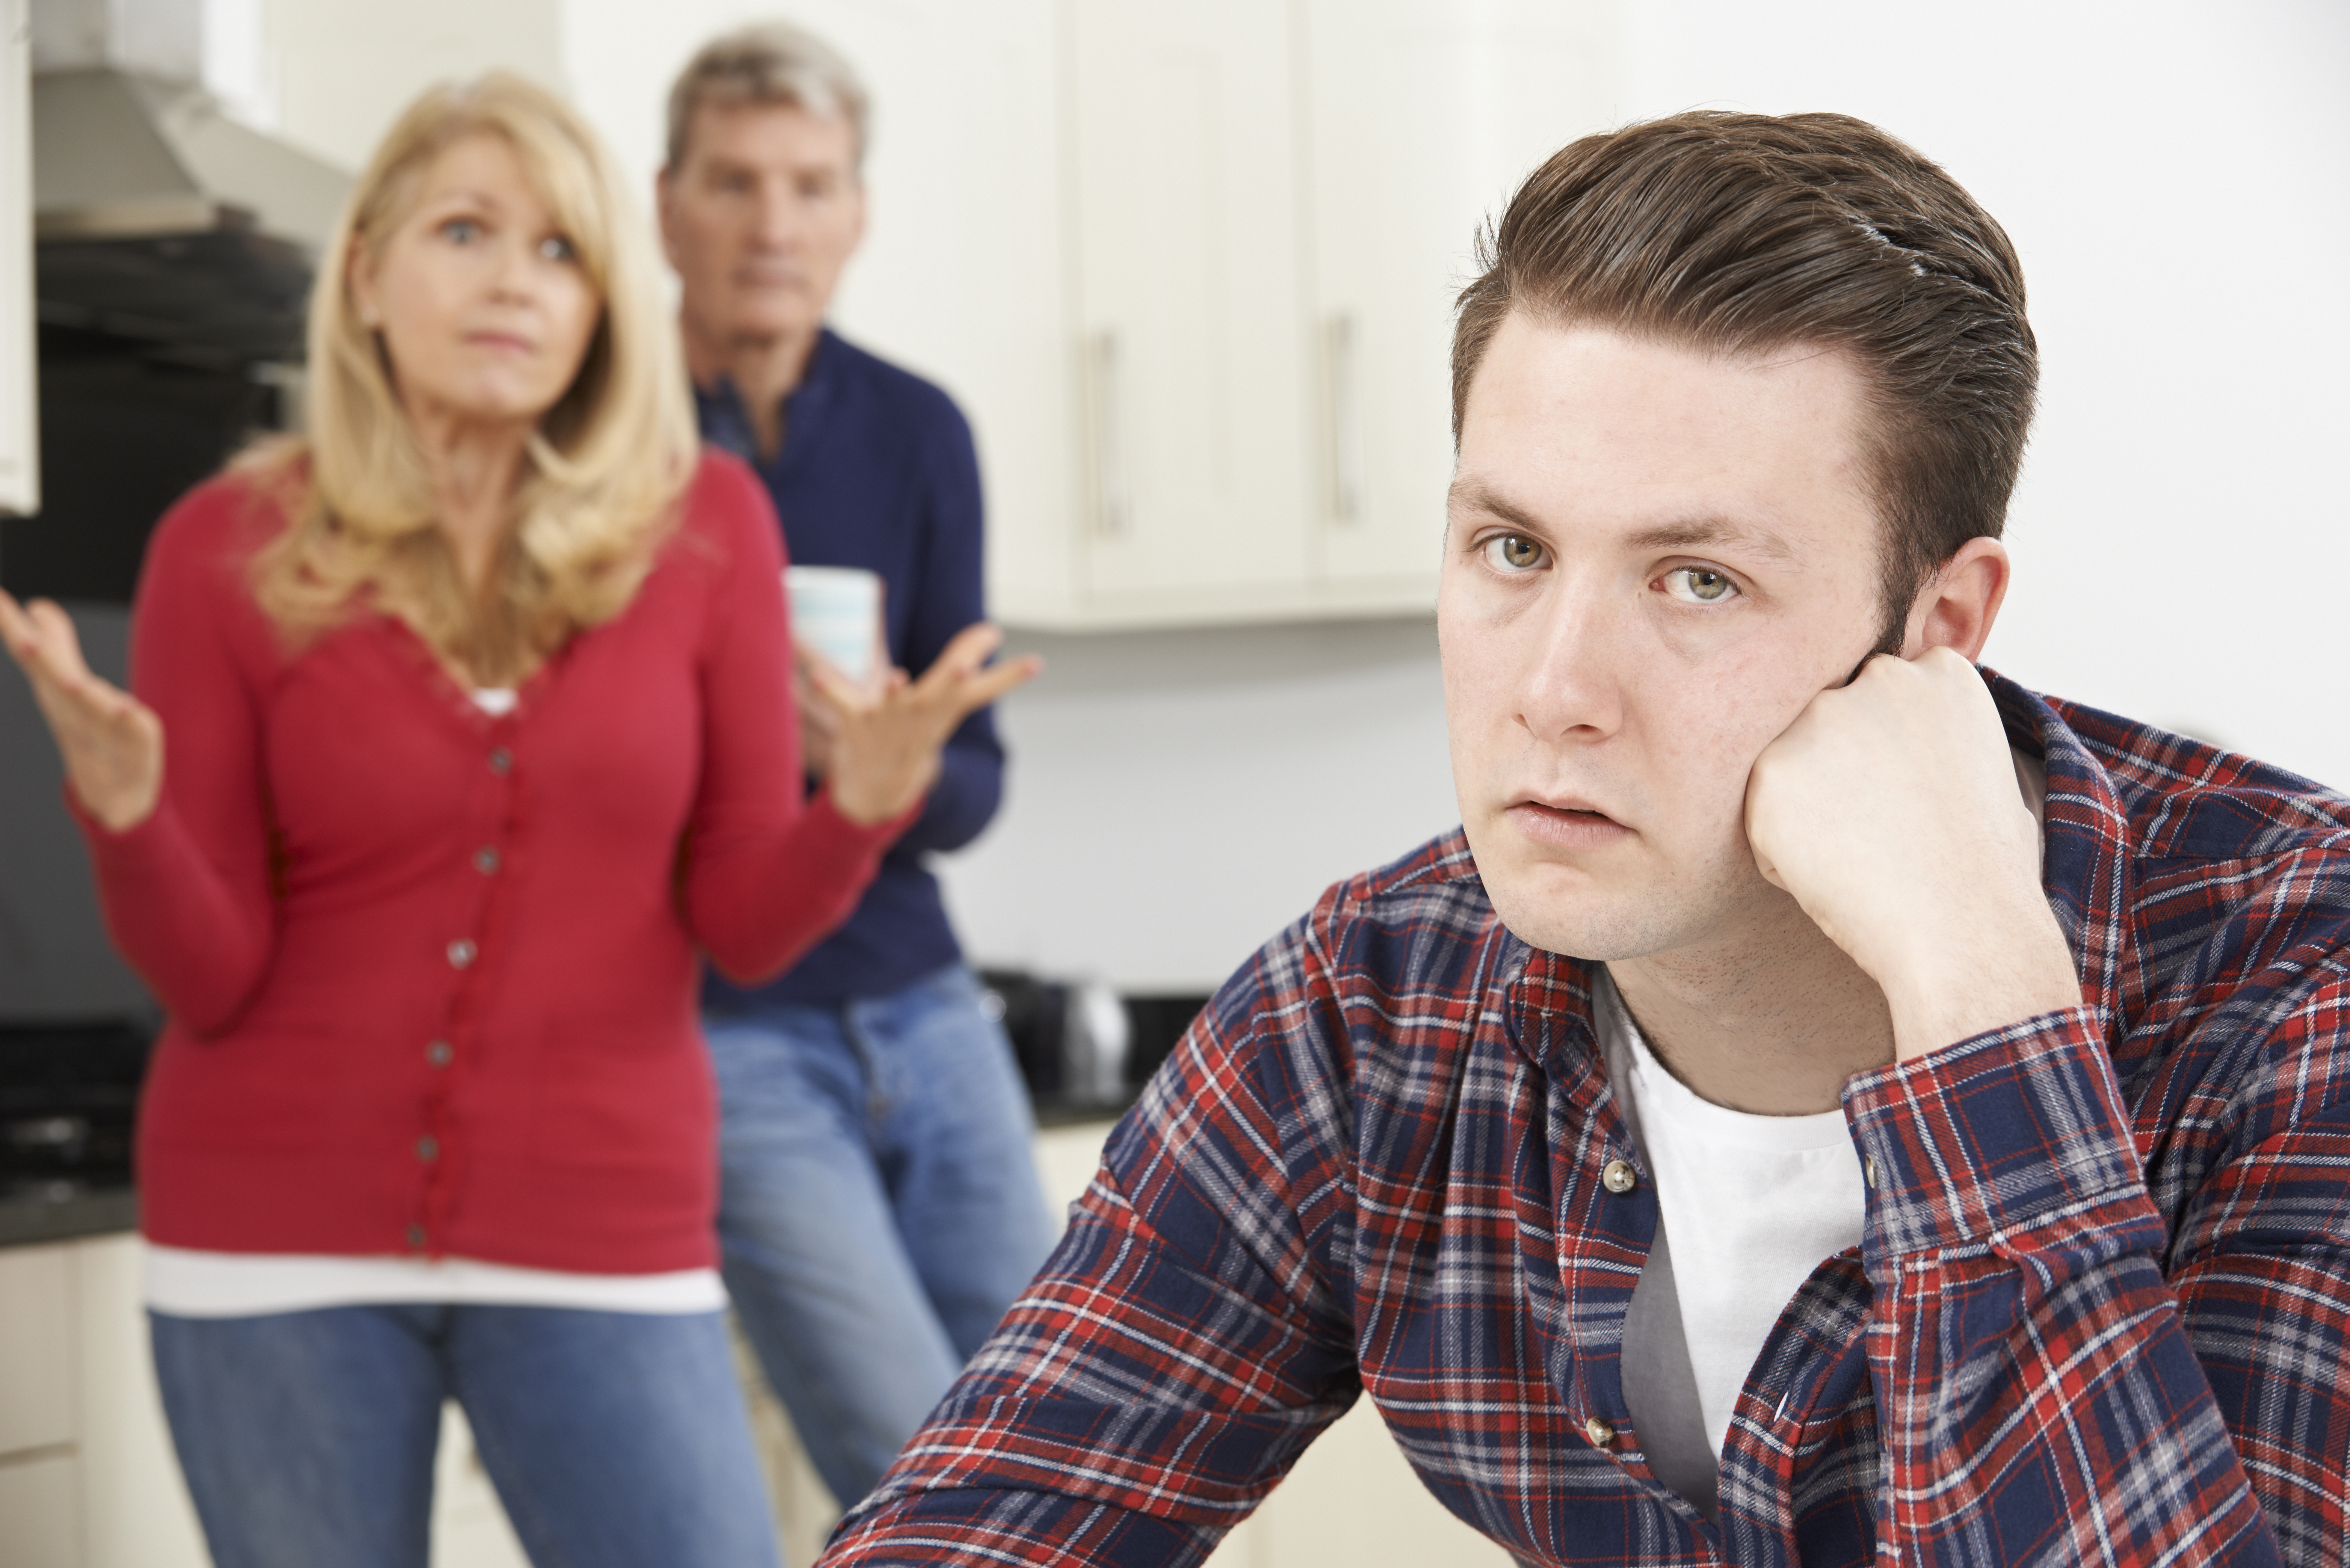 Parents getting mad at their son | Source: Getty Images